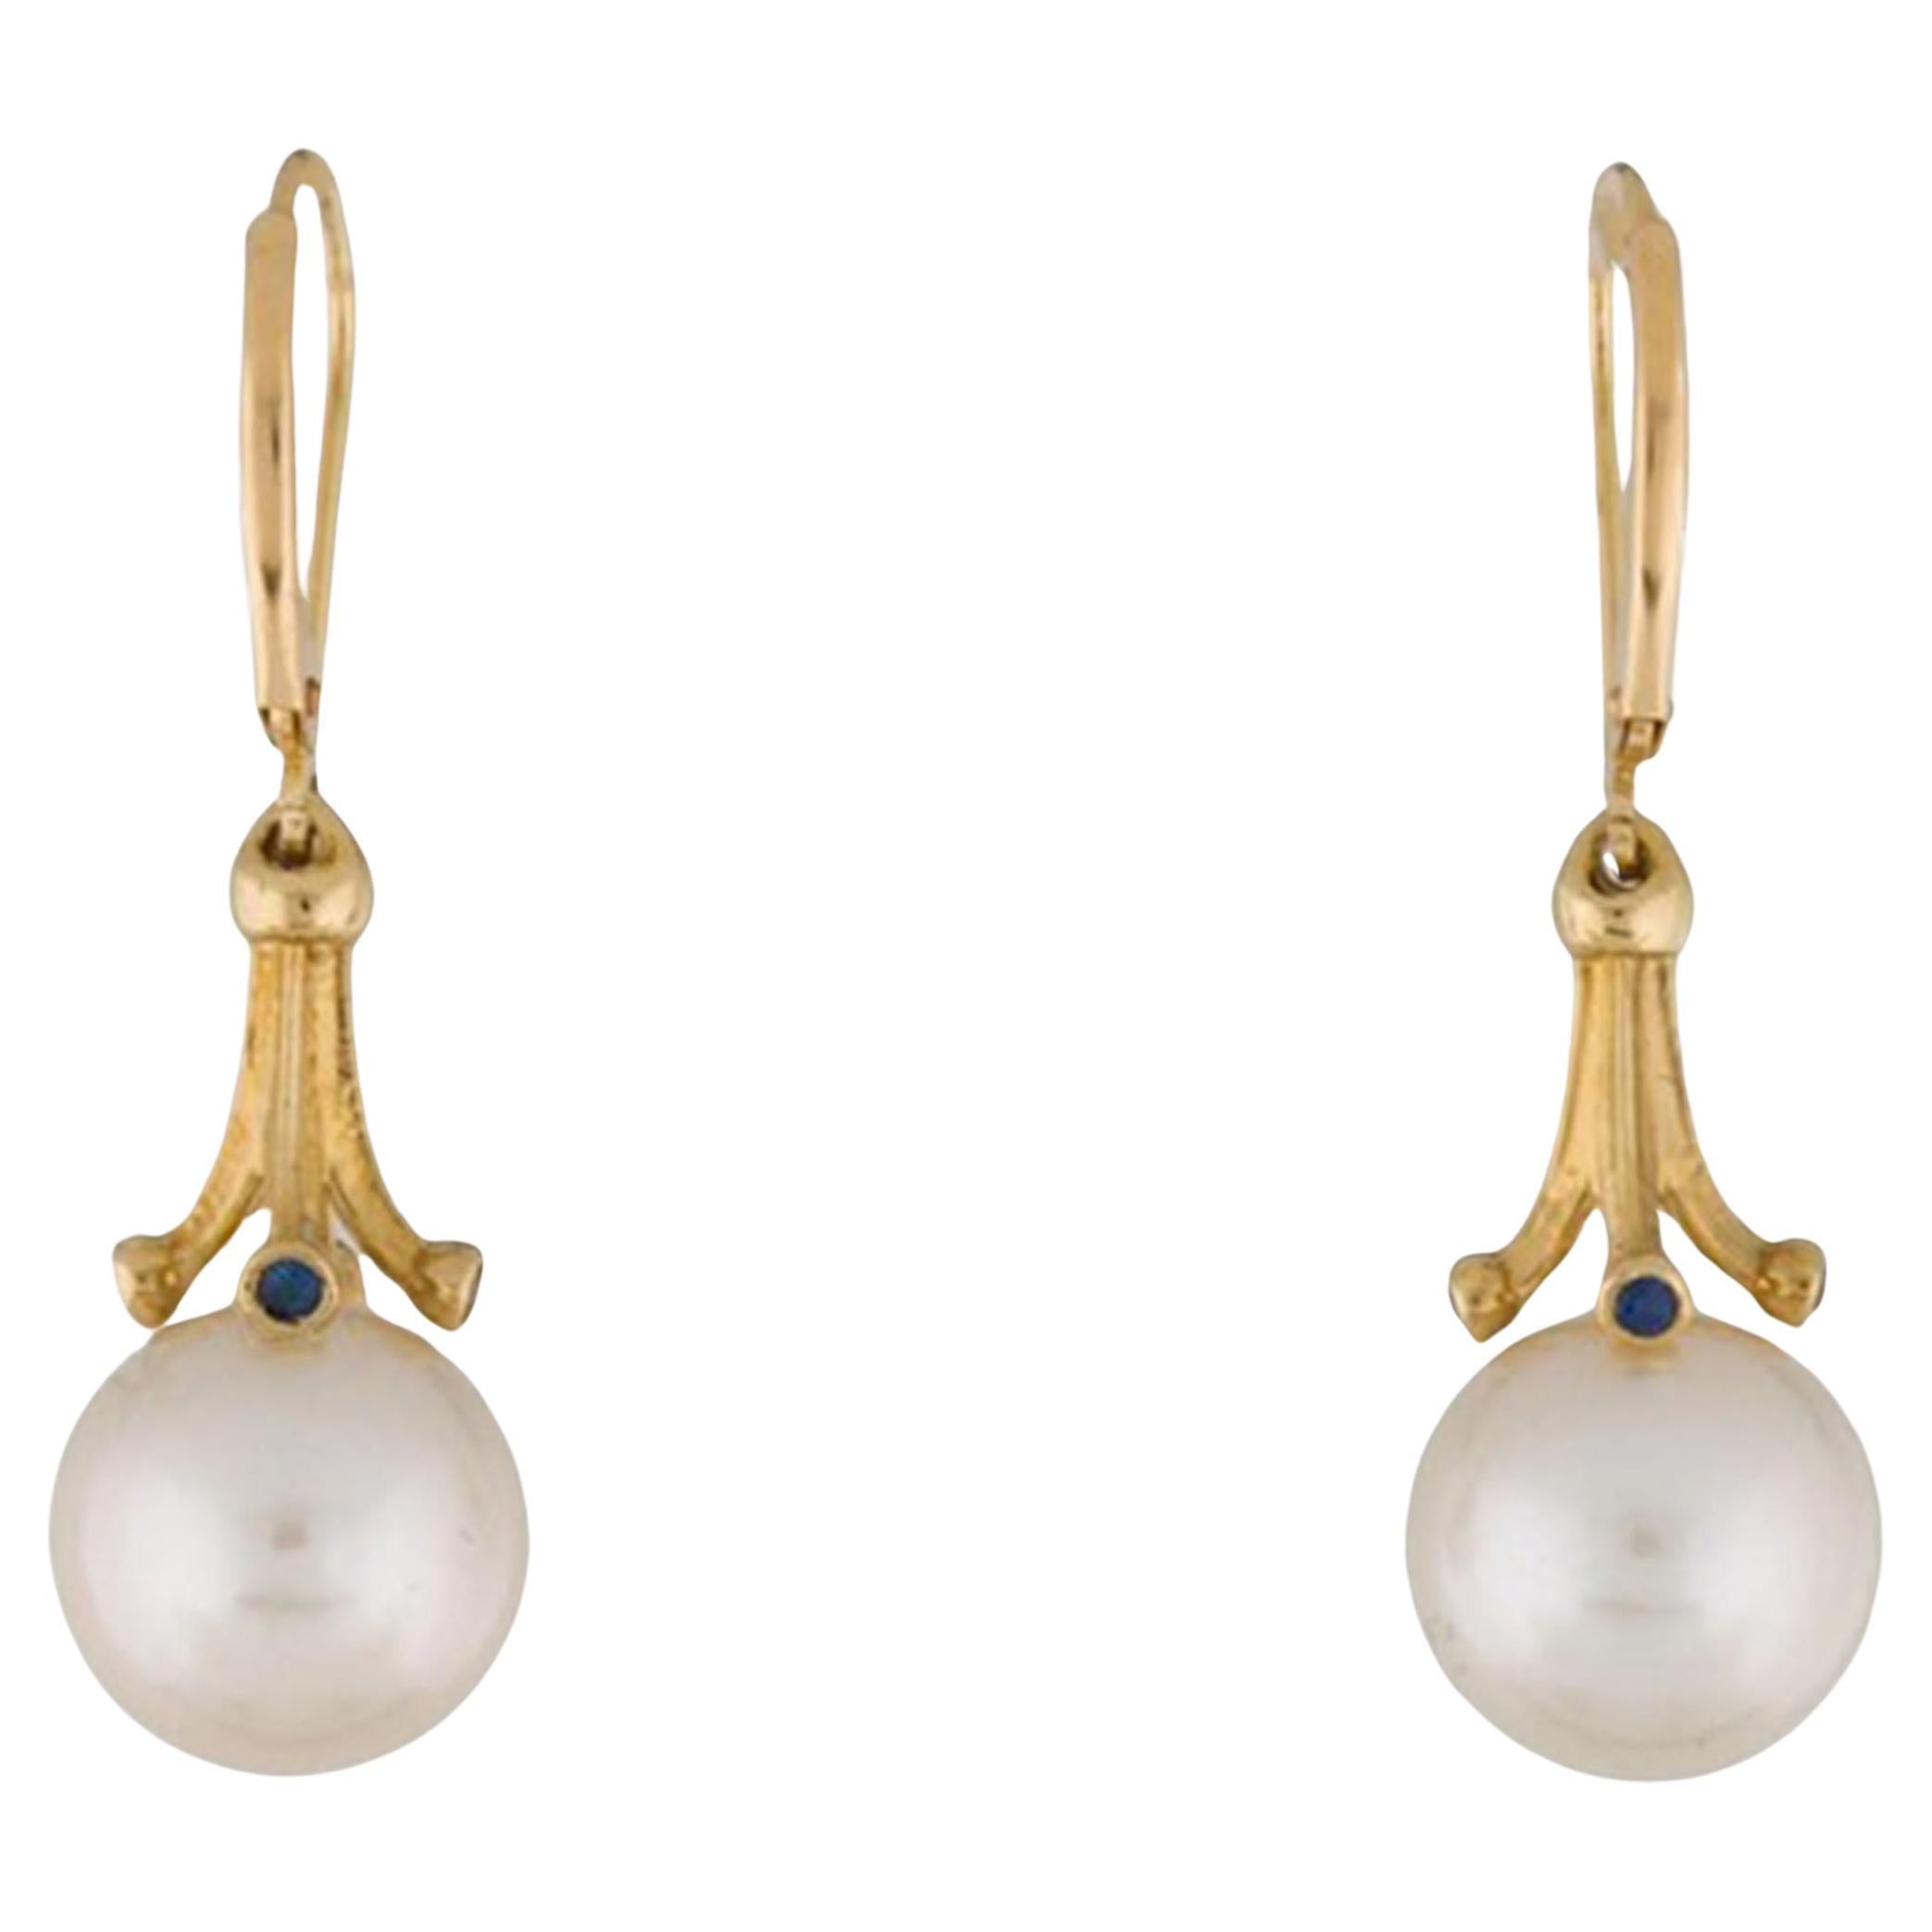     This is a beautiful 14K Yellow Gold Pearl and blue Sapphire Lever back Earrings. This pearl earring features a genuine cultured saltwater akoya pearl and round brilliant-cut sapphires. The pearls are round AAA Flawless 8.0 mm to 9 mm in size